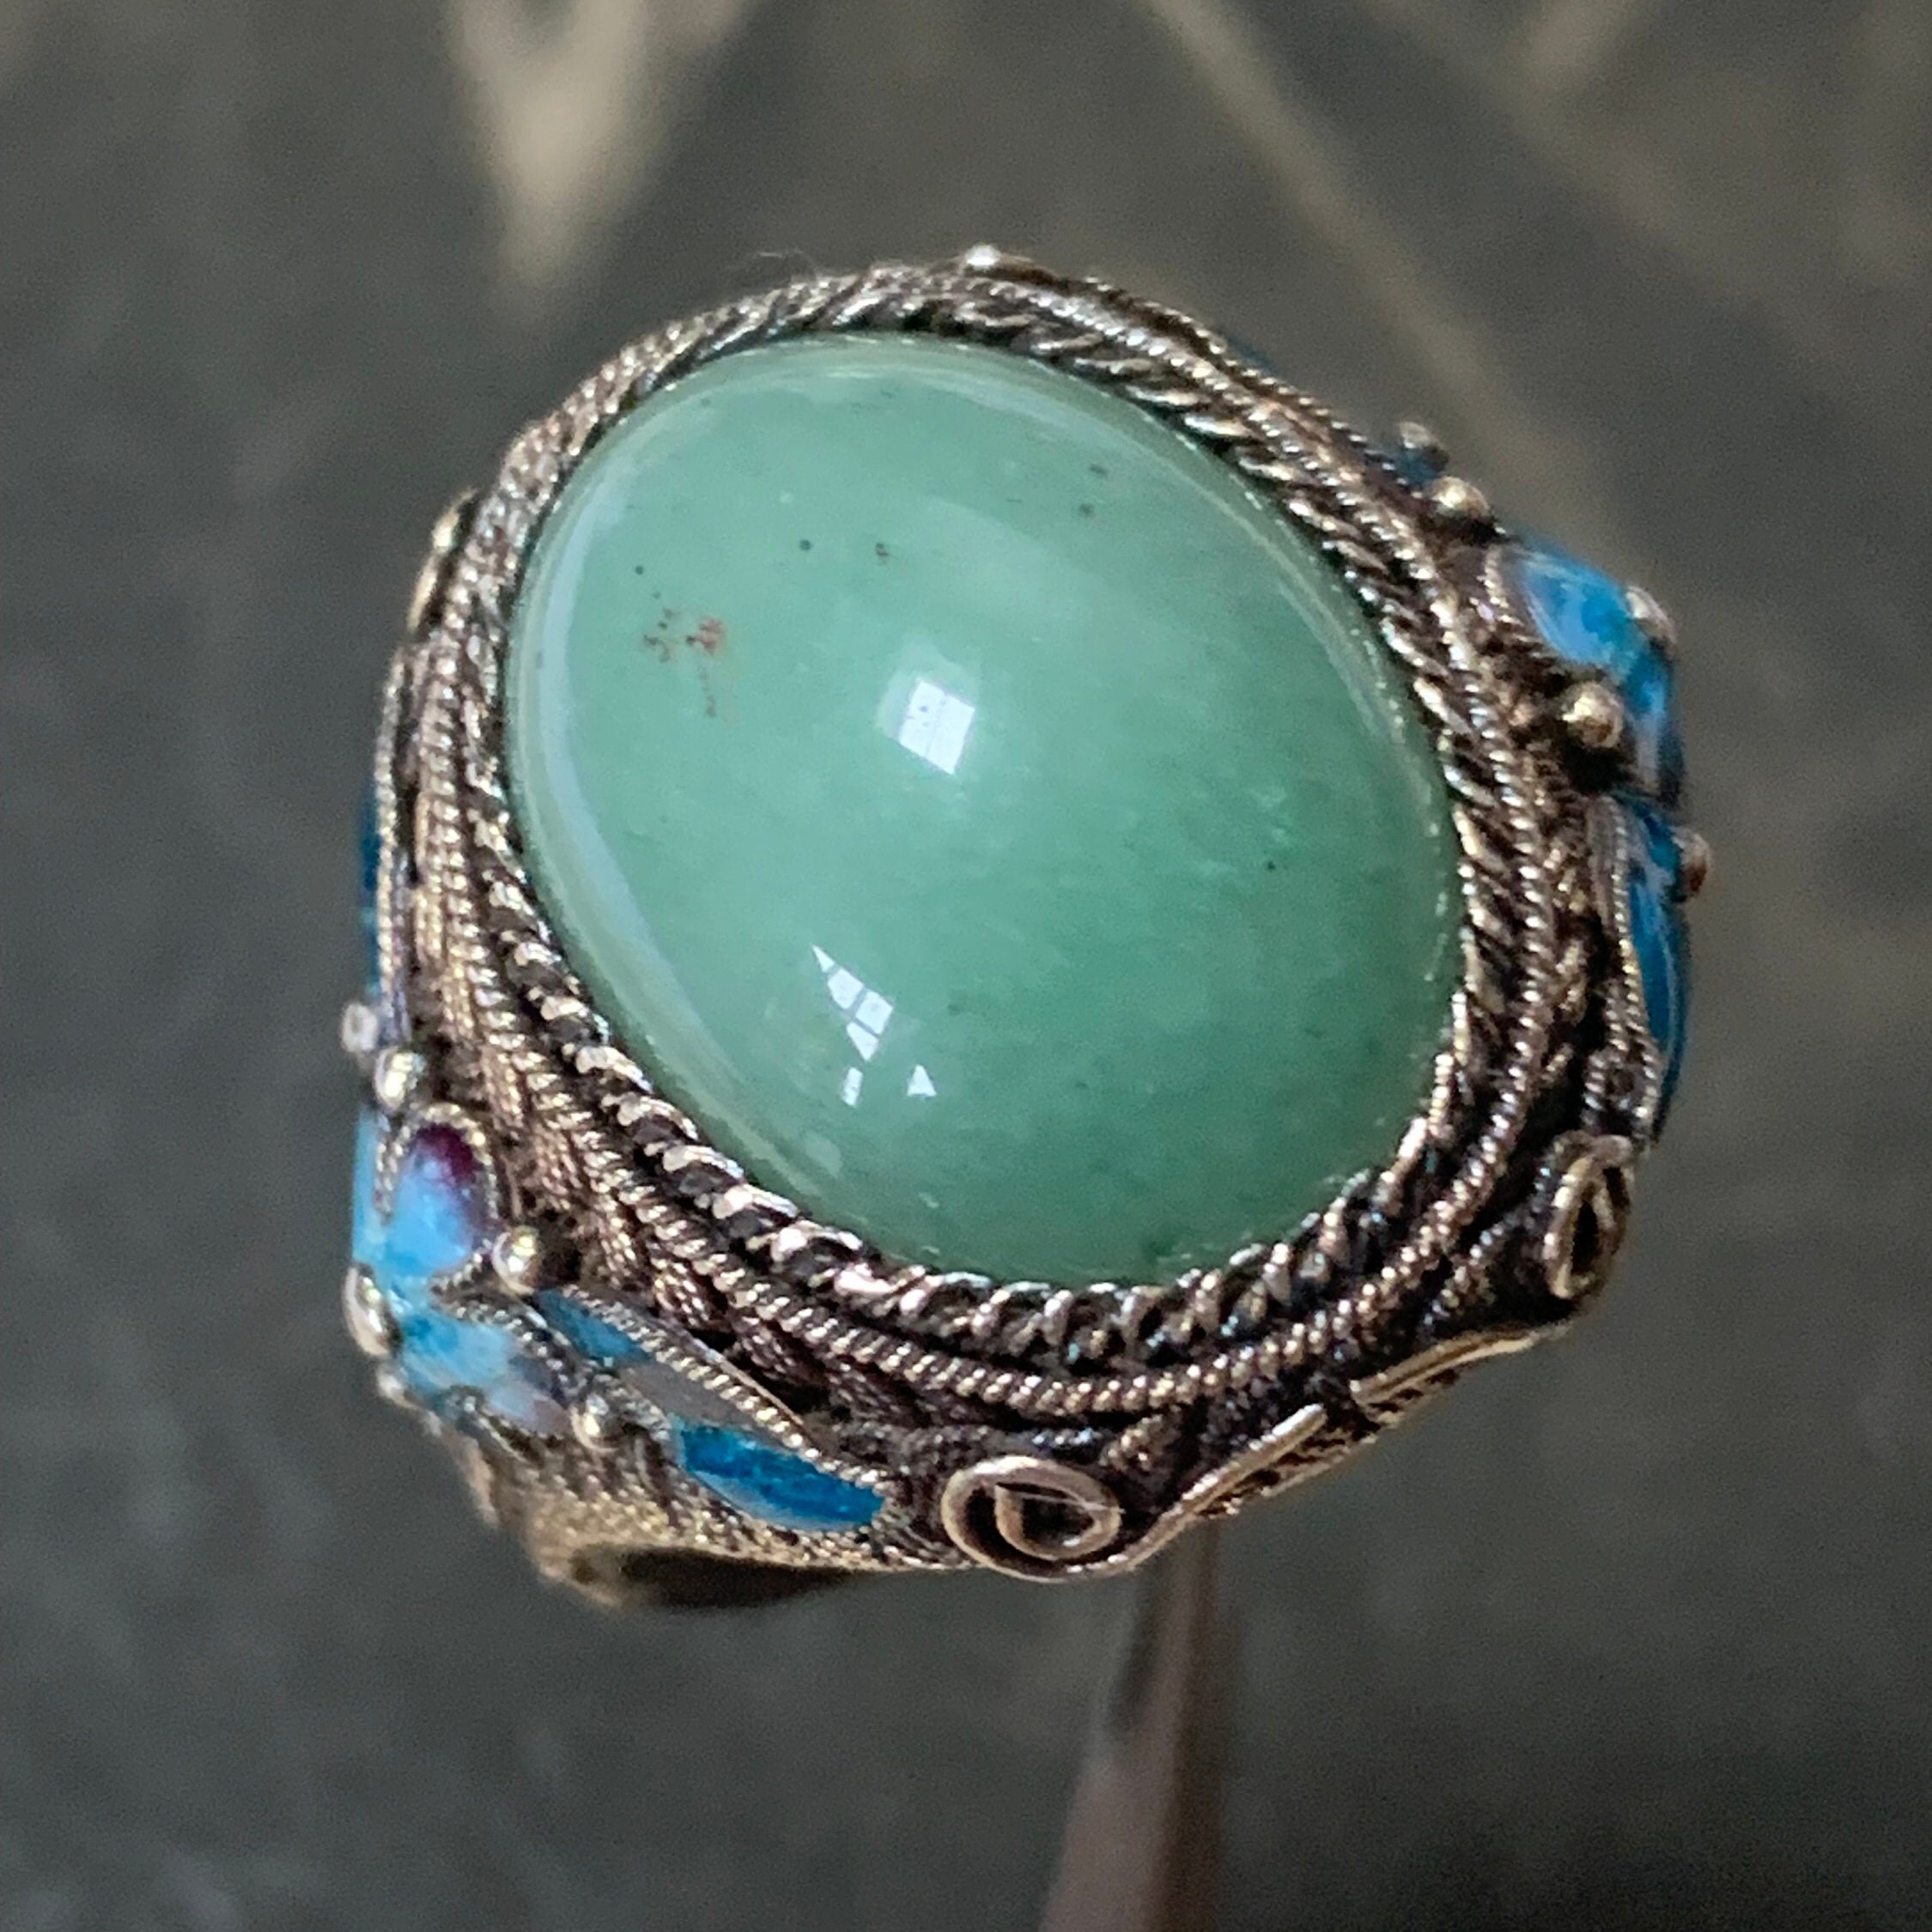 Edwardian Jade Ring With Fine Silver Filigree. Beautiful Blue Cloisonne Floral Enameling To The Shoulders